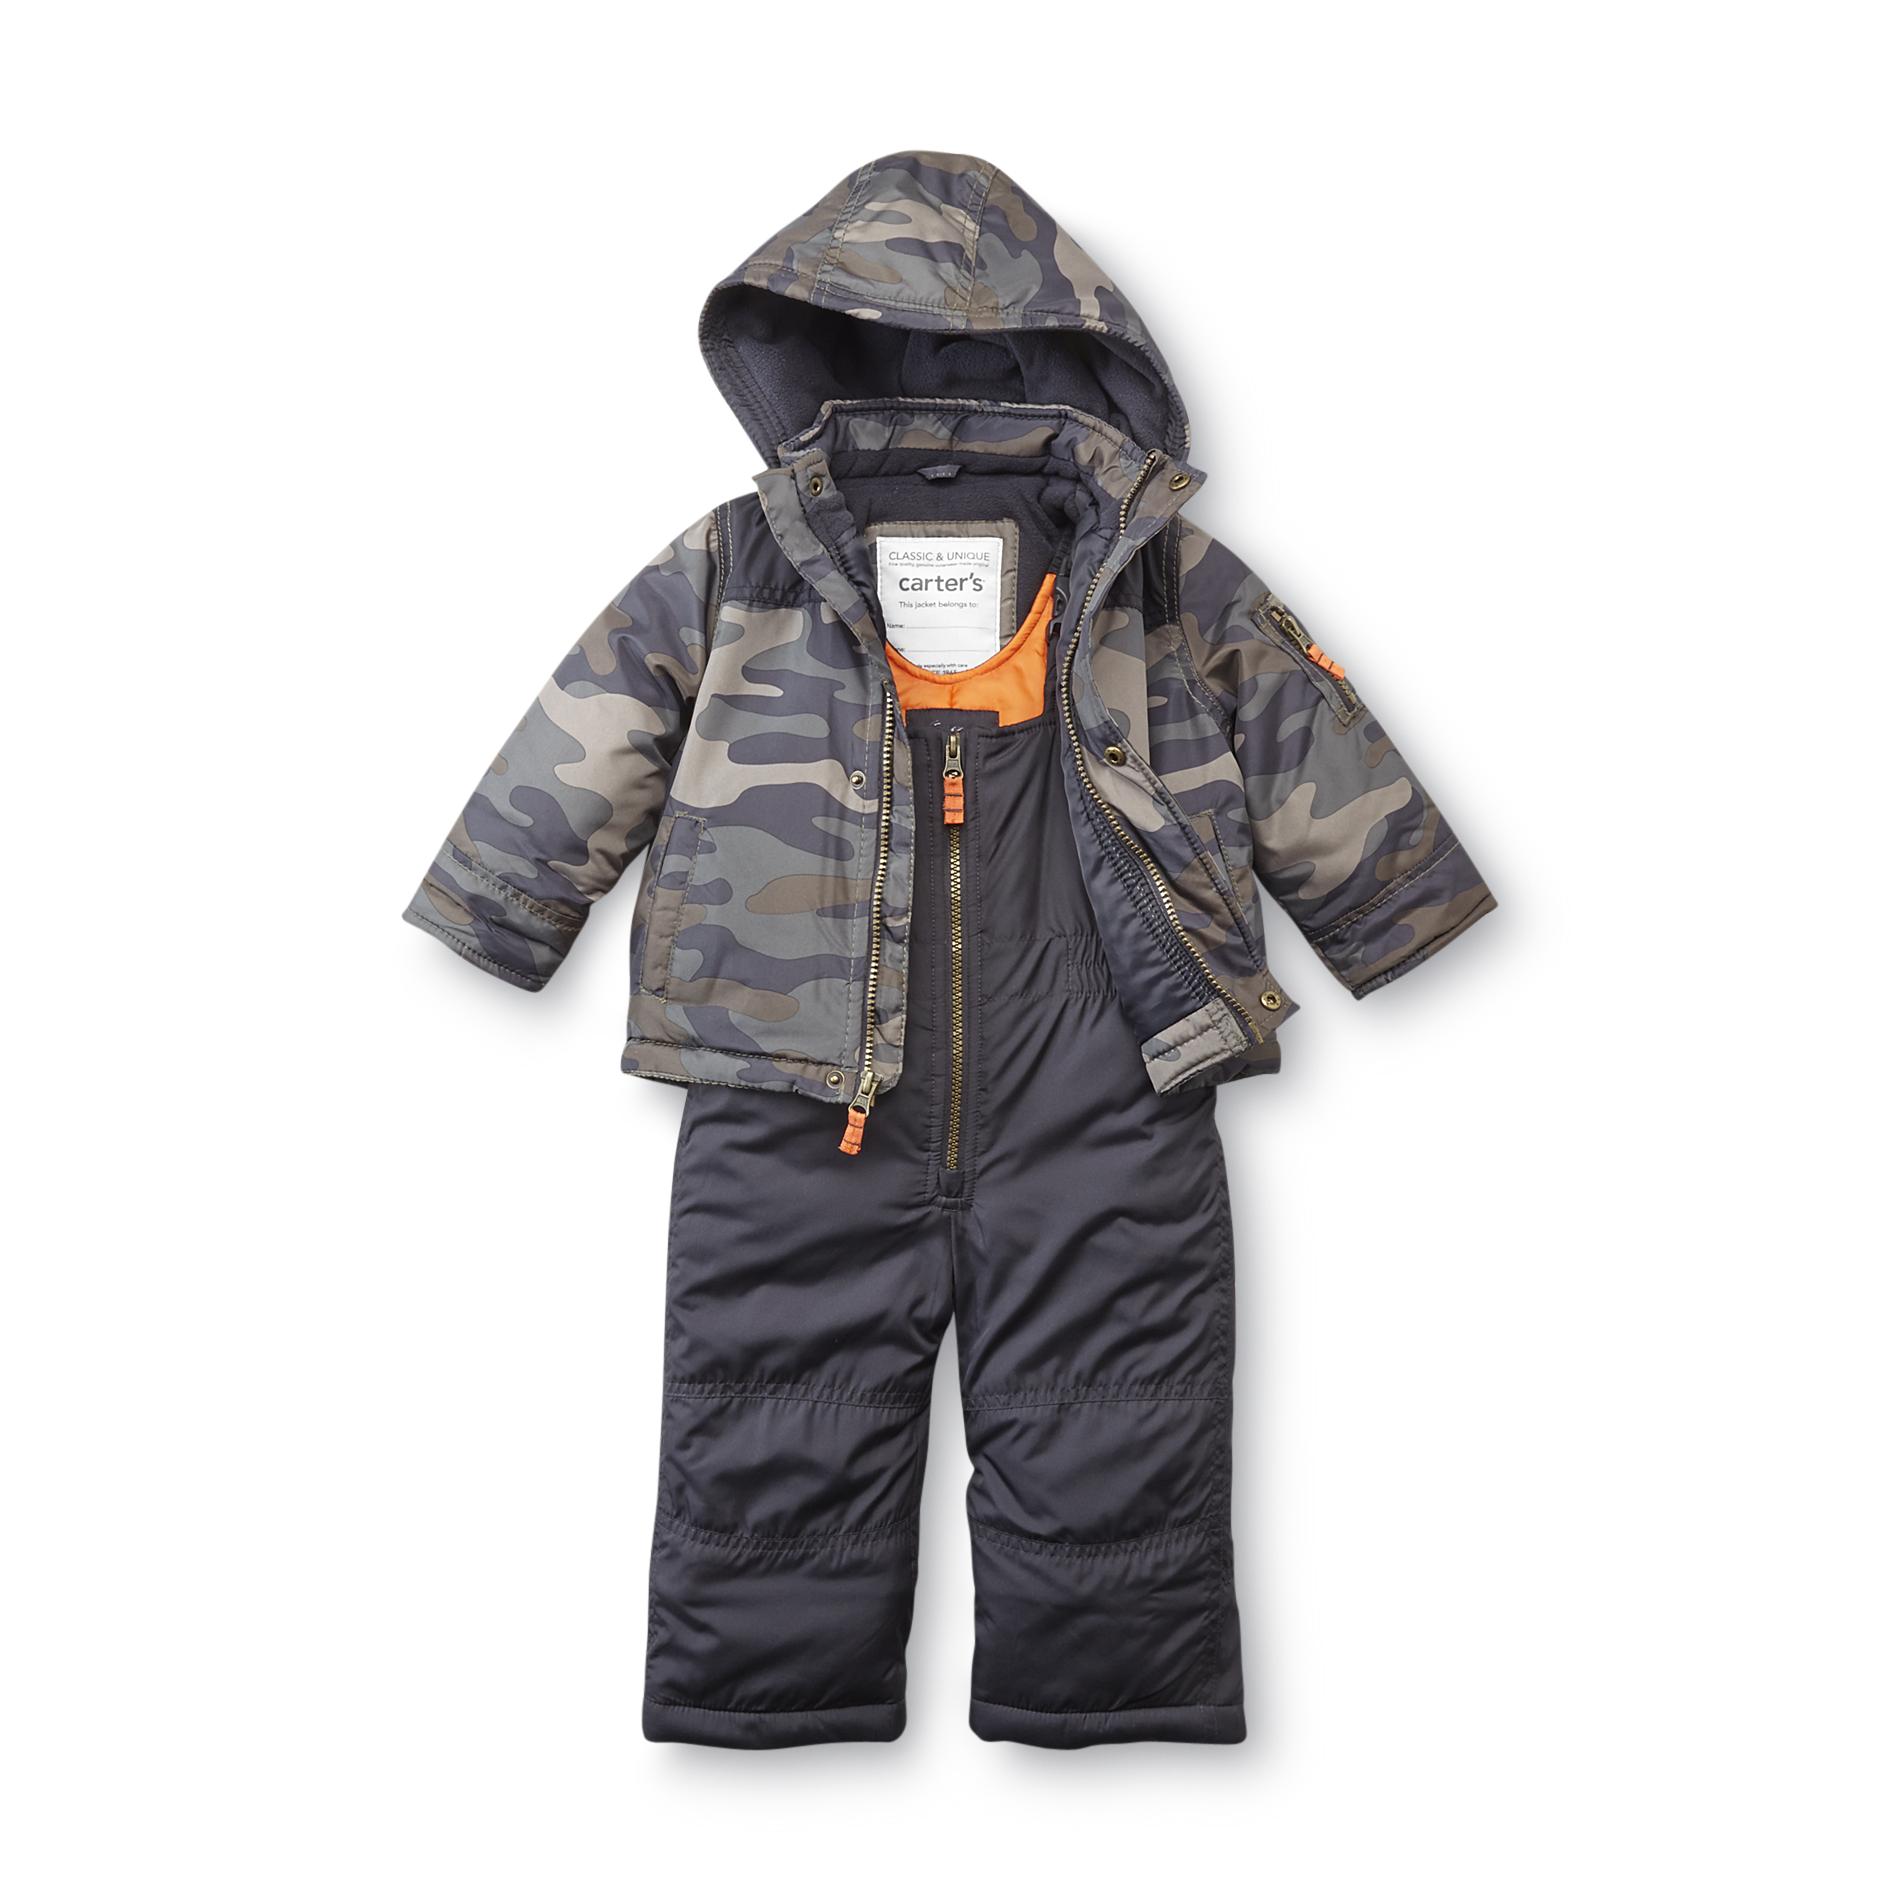 Carter's Infant & Toddler Boy's Snowsuit Camo Shop Your Way Online Shopping & Earn Points